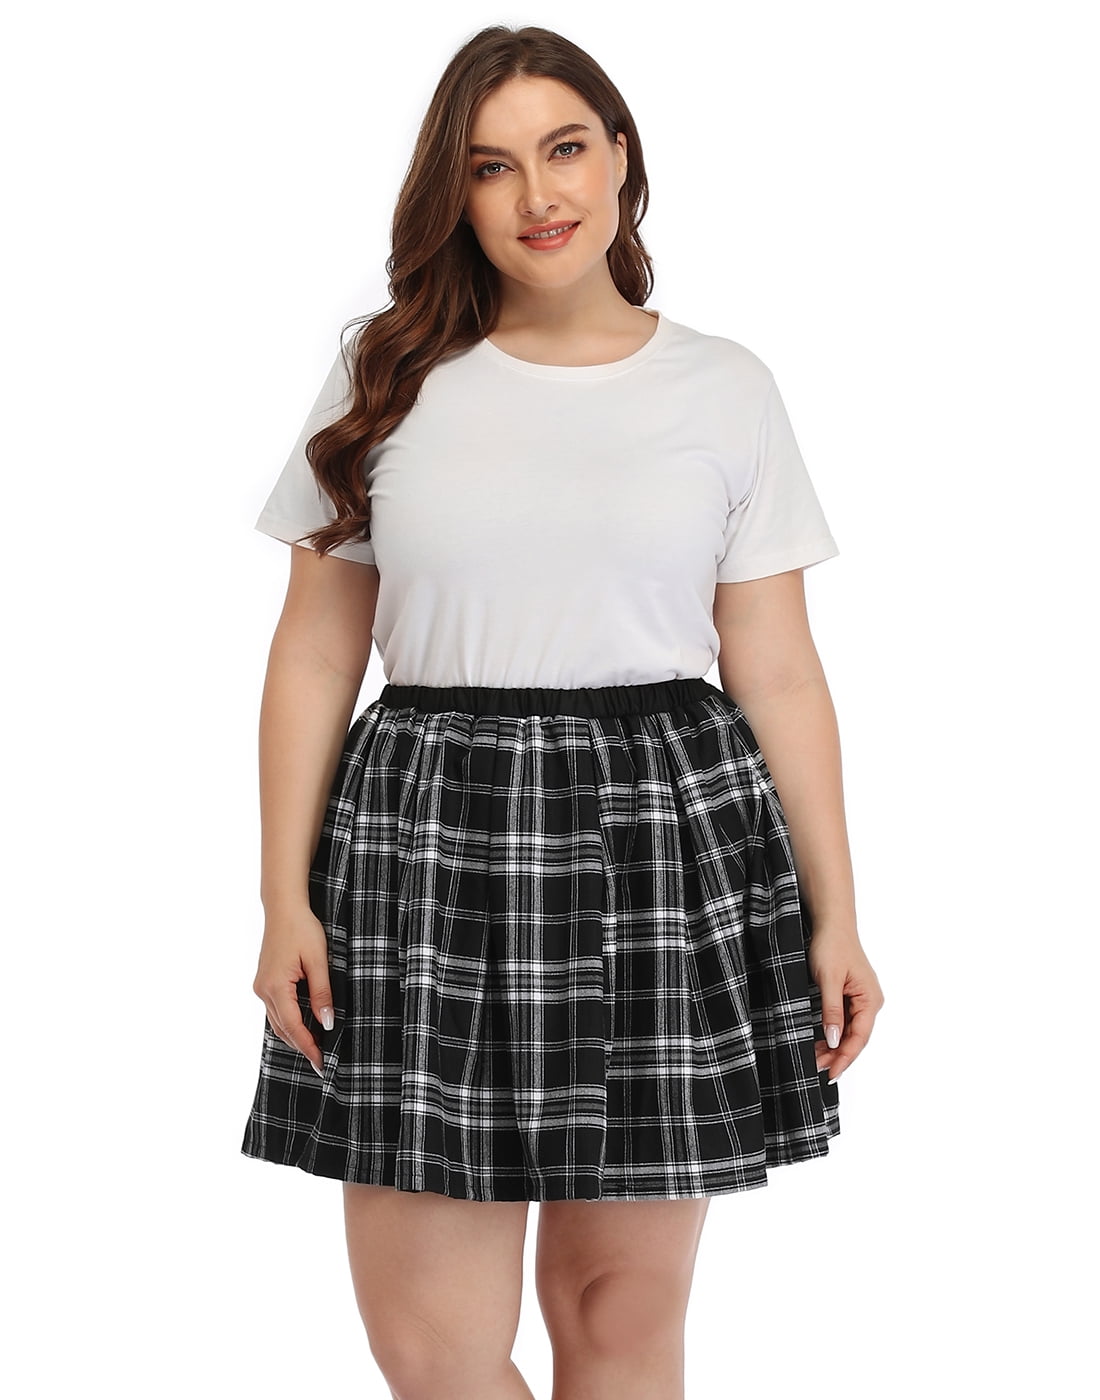 Shopping Made Easy And Fun Women Men Plaid Skirt Low Rise Pleated Mini Skirt A Line Skater